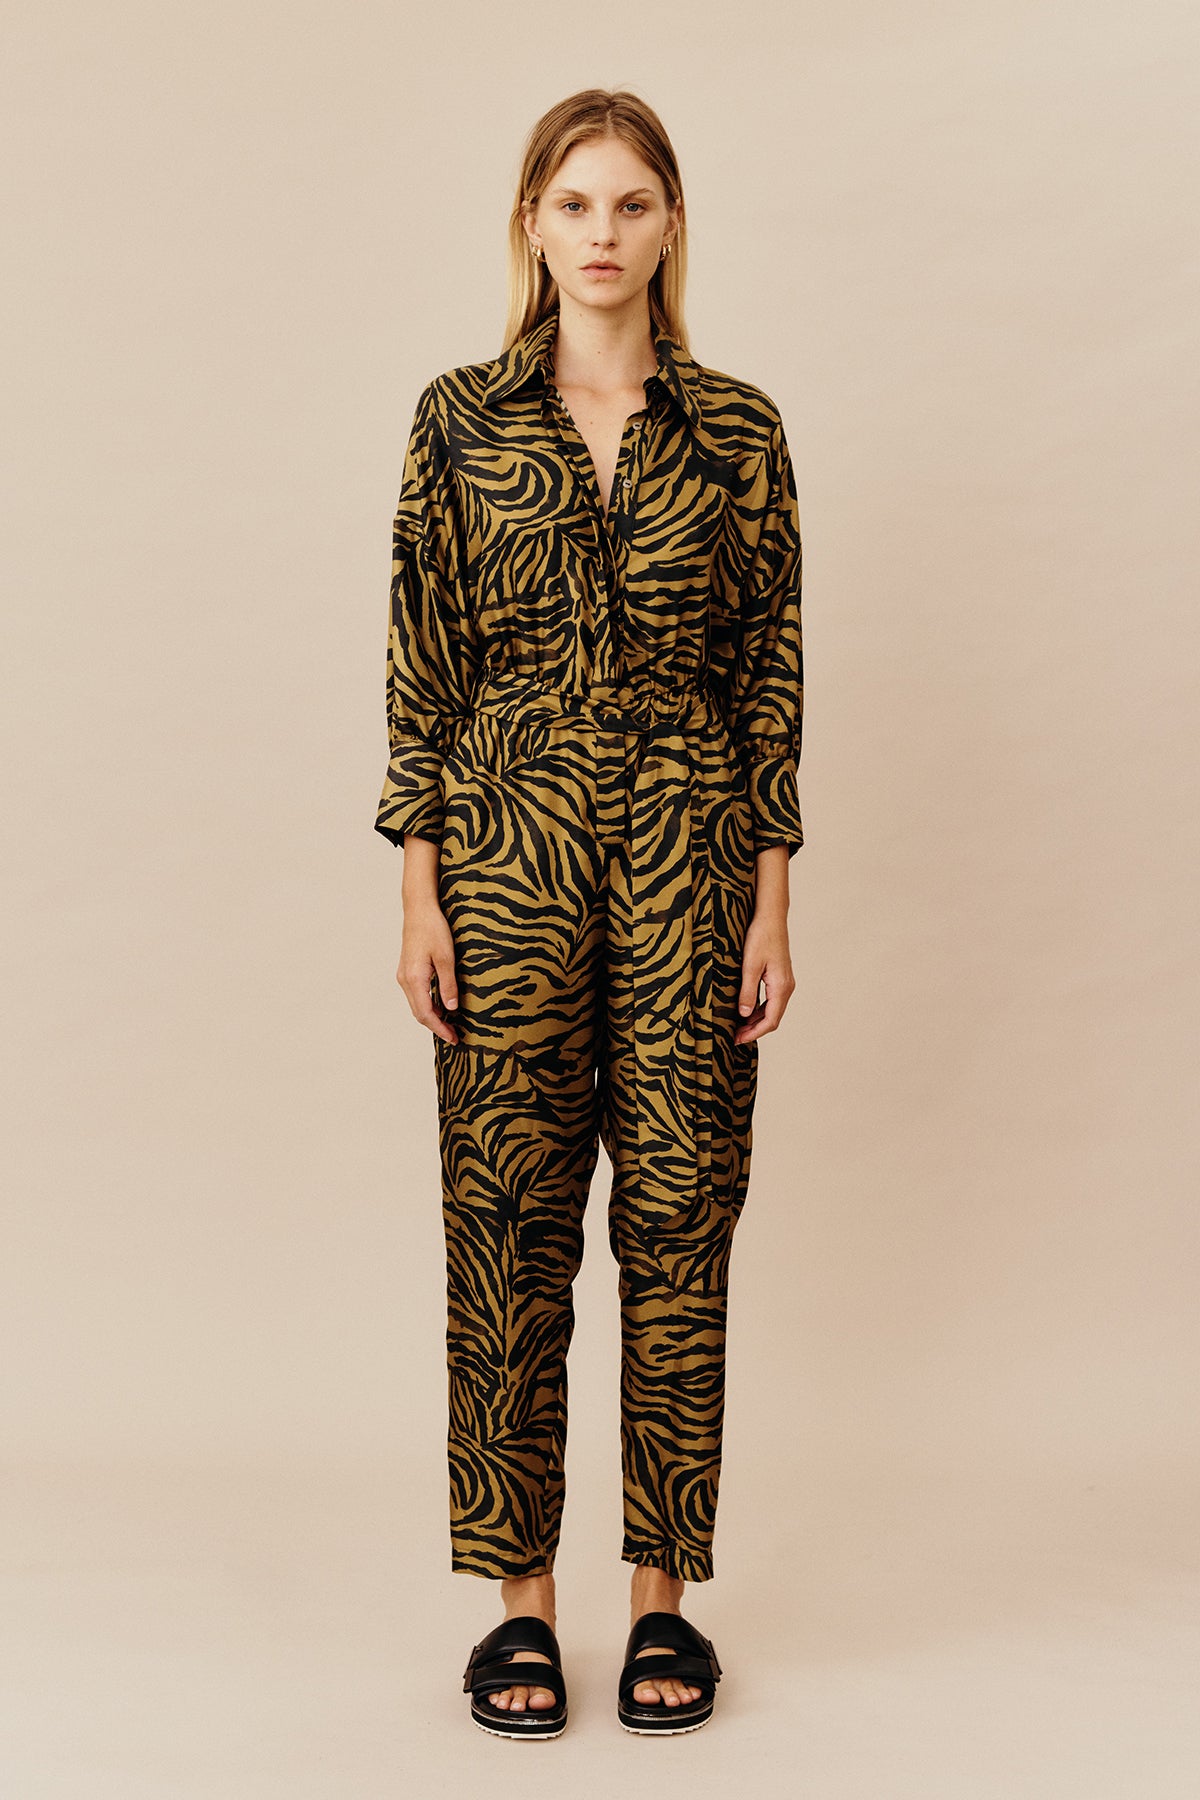 Model wearing Australian women’s fashion designer GINGER & SMARTS’ Feline Jumpsuit, crafted from a silk twill in olive green and gold animal print with a tapered leg silhouette, shirt collar, button through front, half sleeve and elasticised waist with tie. 